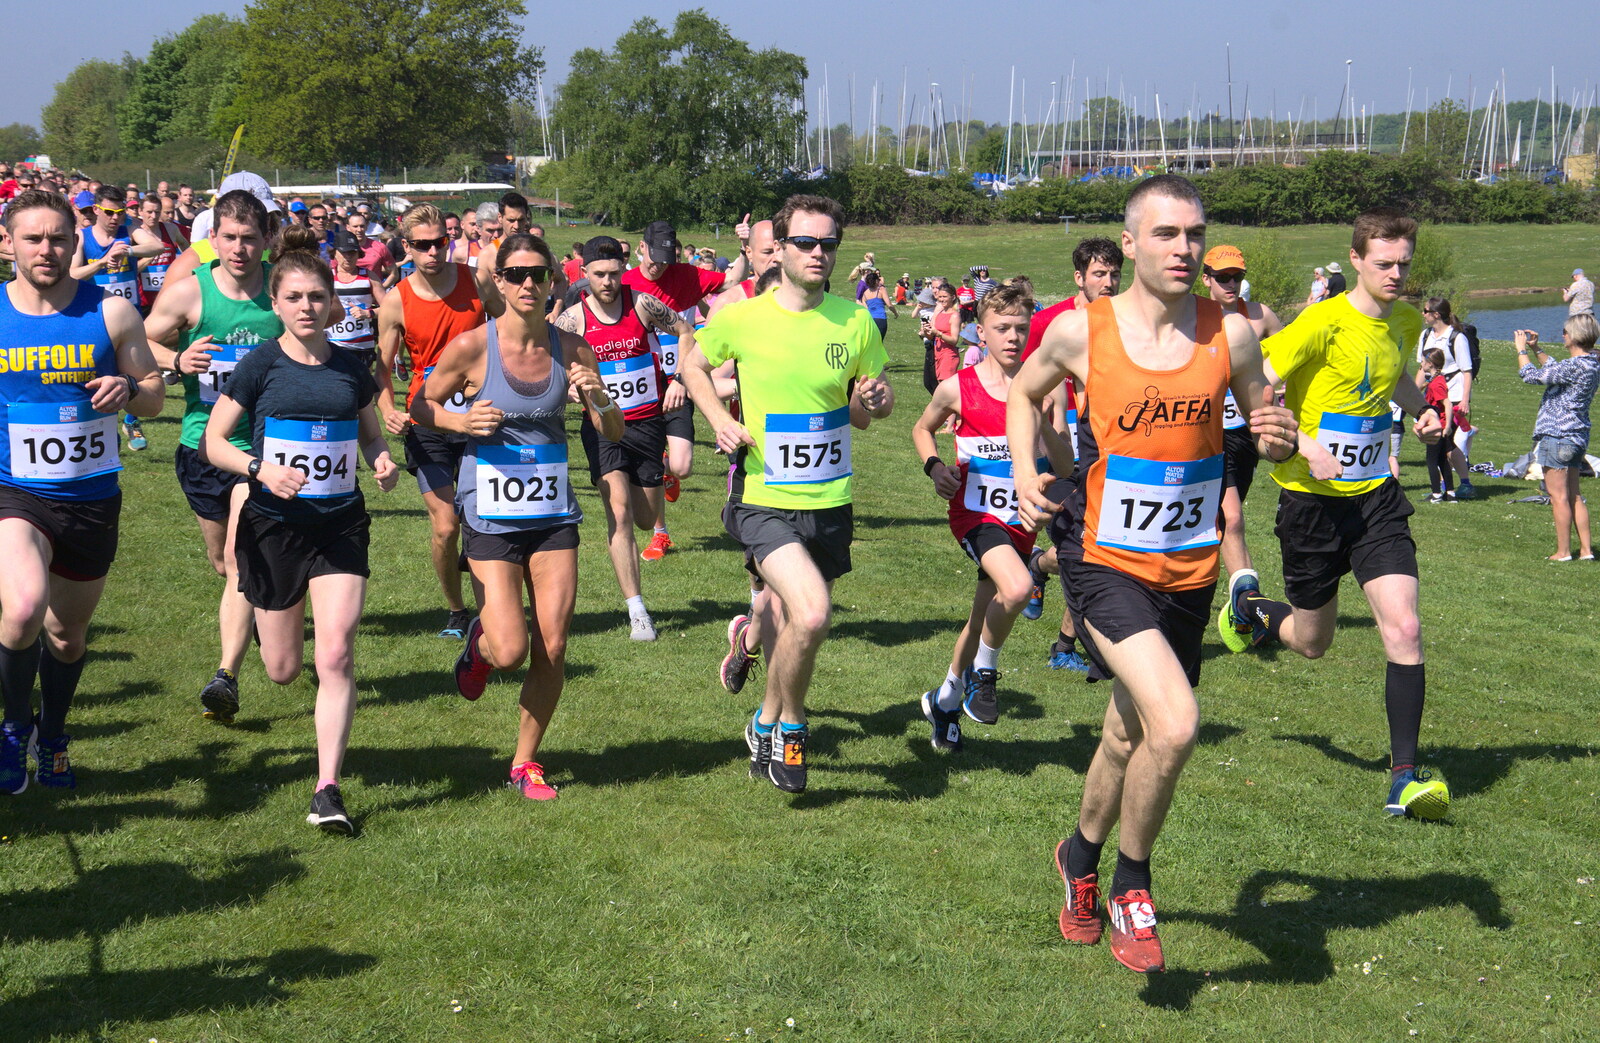 The serious runners go first from Isobel's 10km Run, Alton Water, Stutton, Suffolk - 6th May 2018